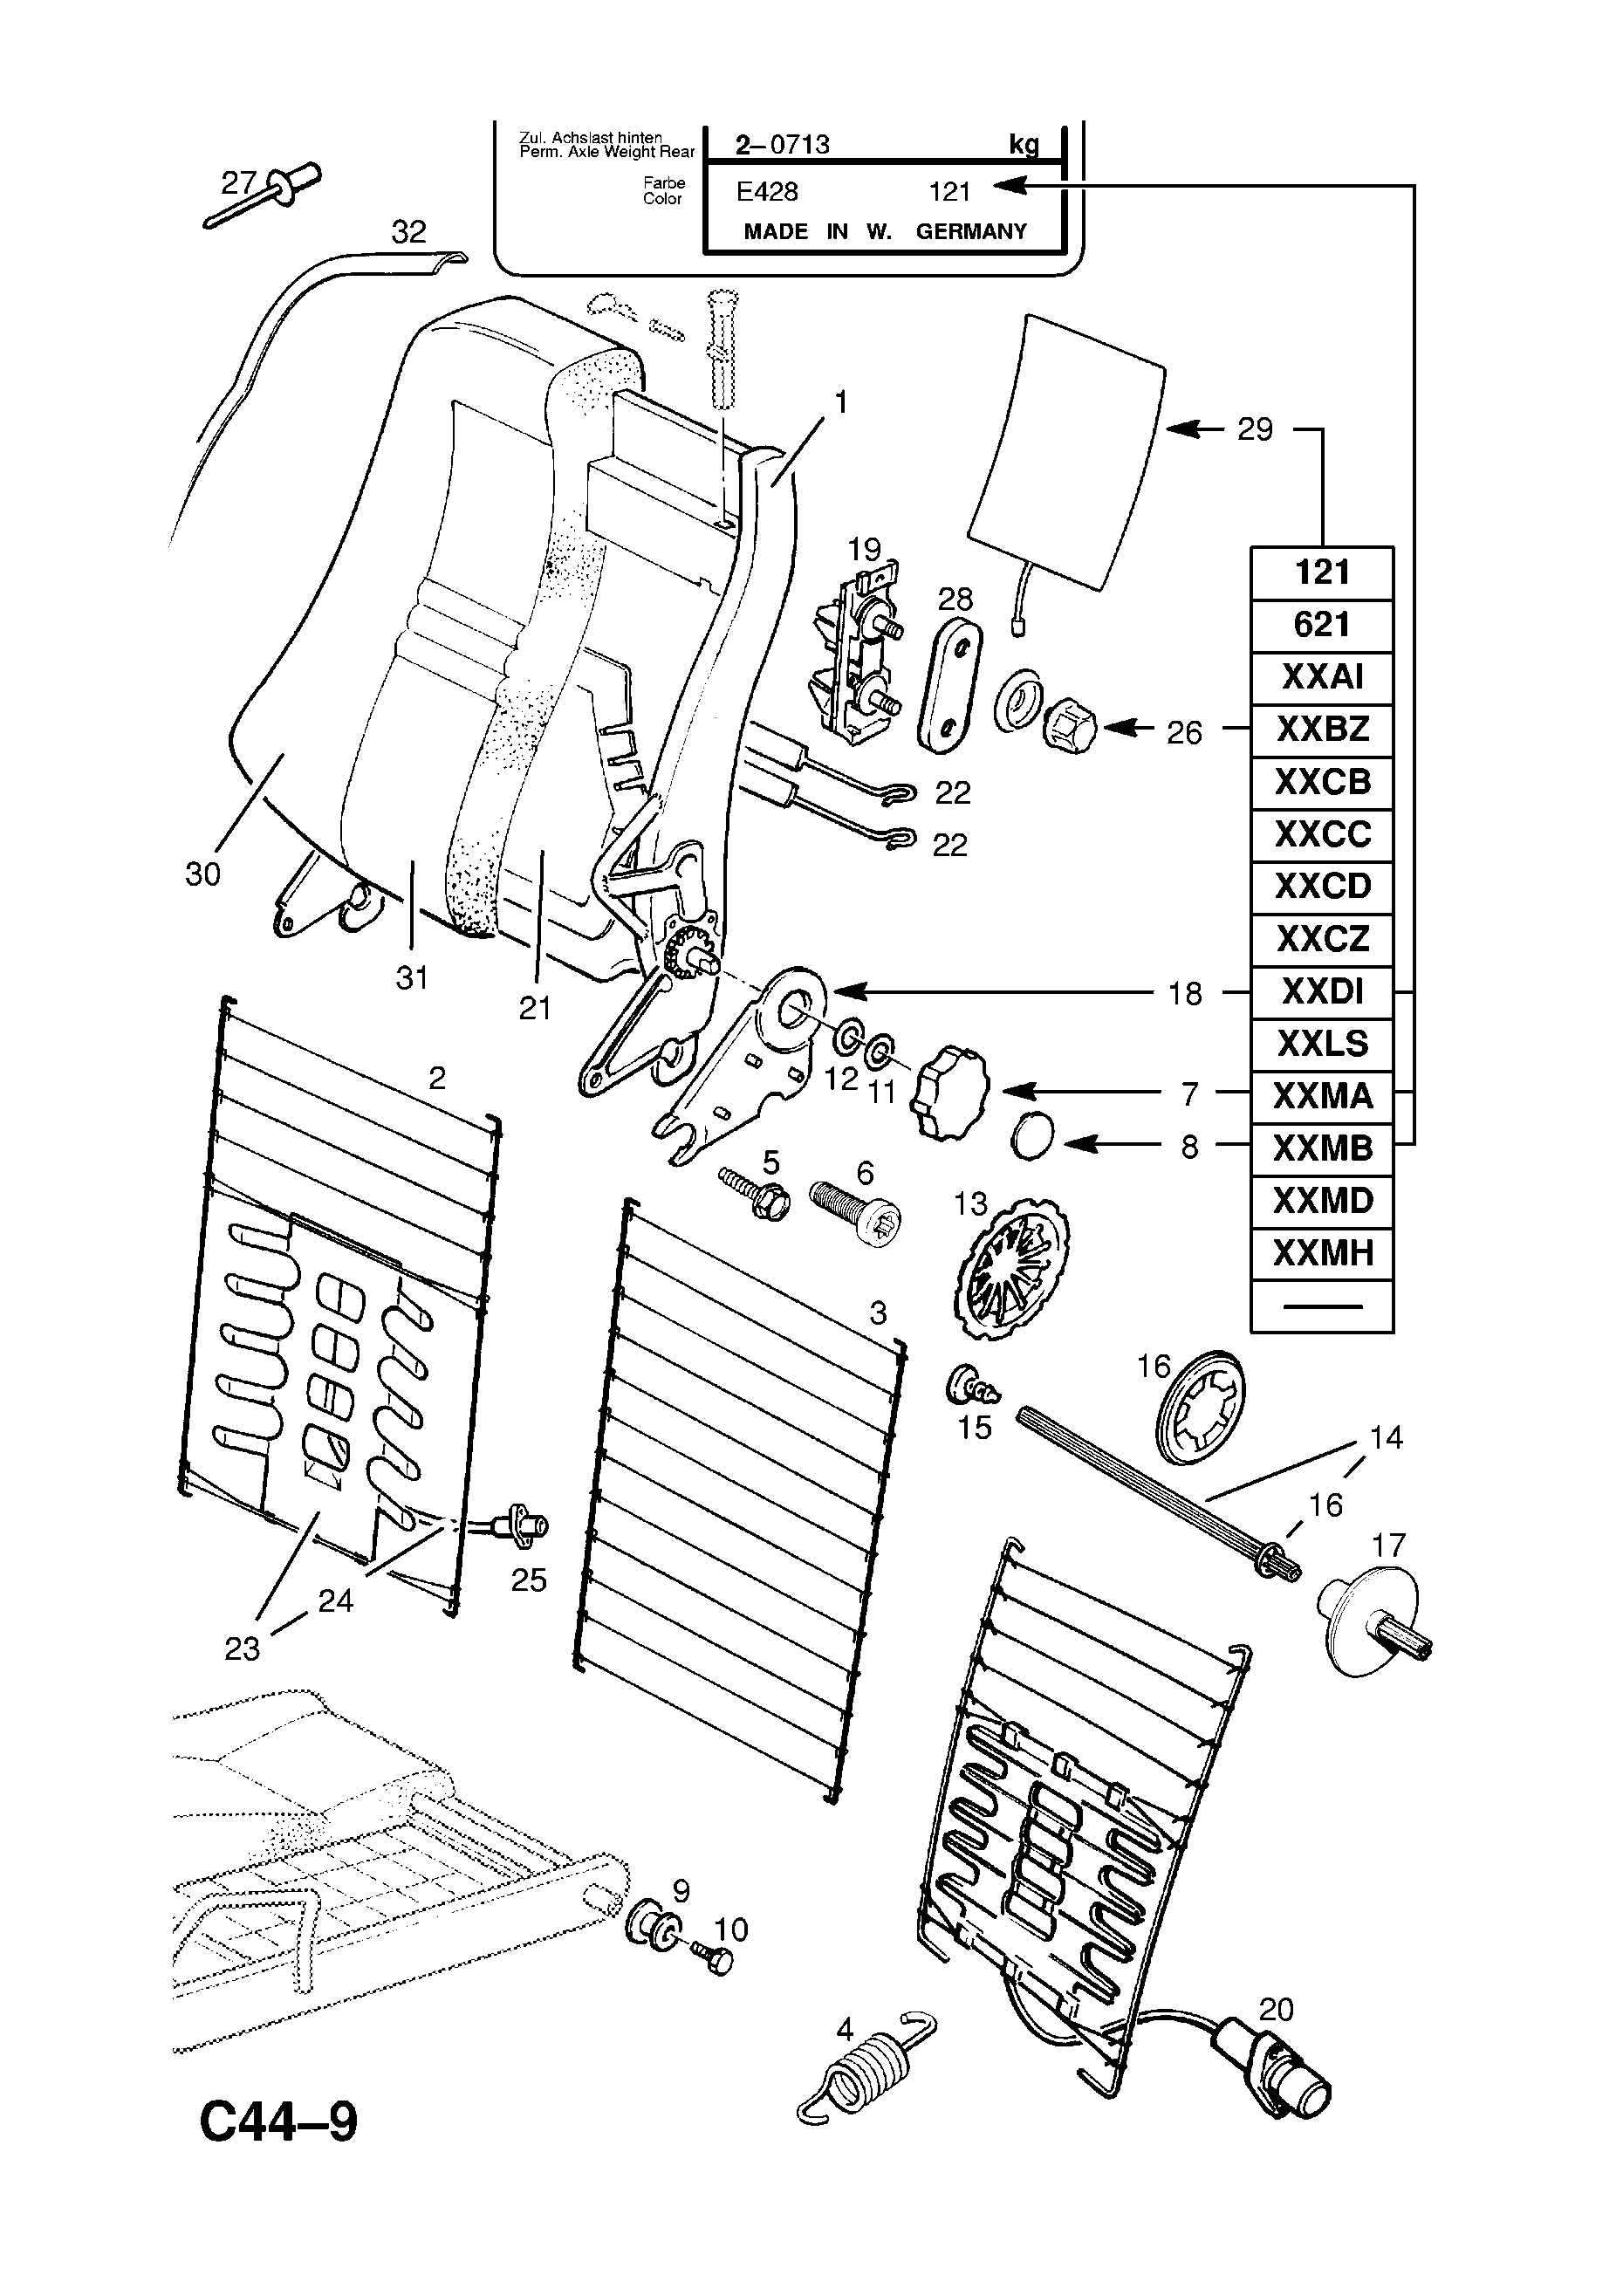 ADJUSTER MECHANISM COVERS <small><i>[-X1999999]</i></small>